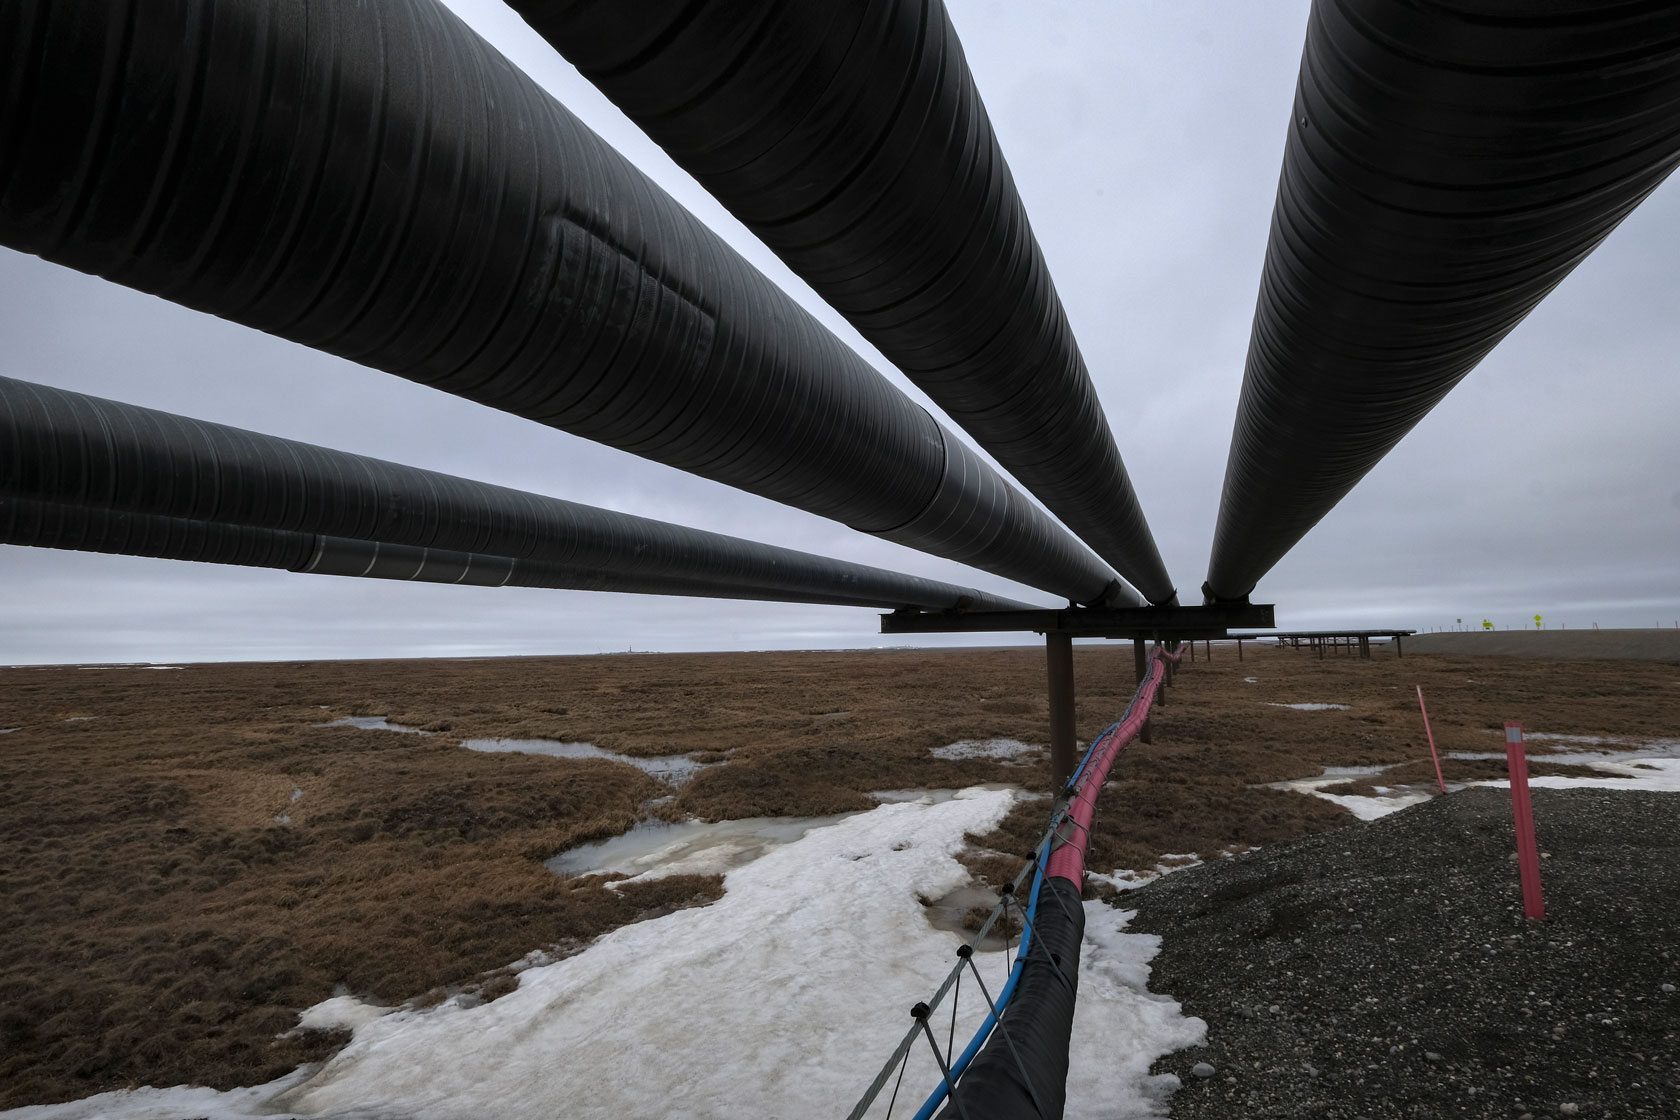 An oil pipeline stretches across an open landscape over patches of snow beneath an overcast sky.